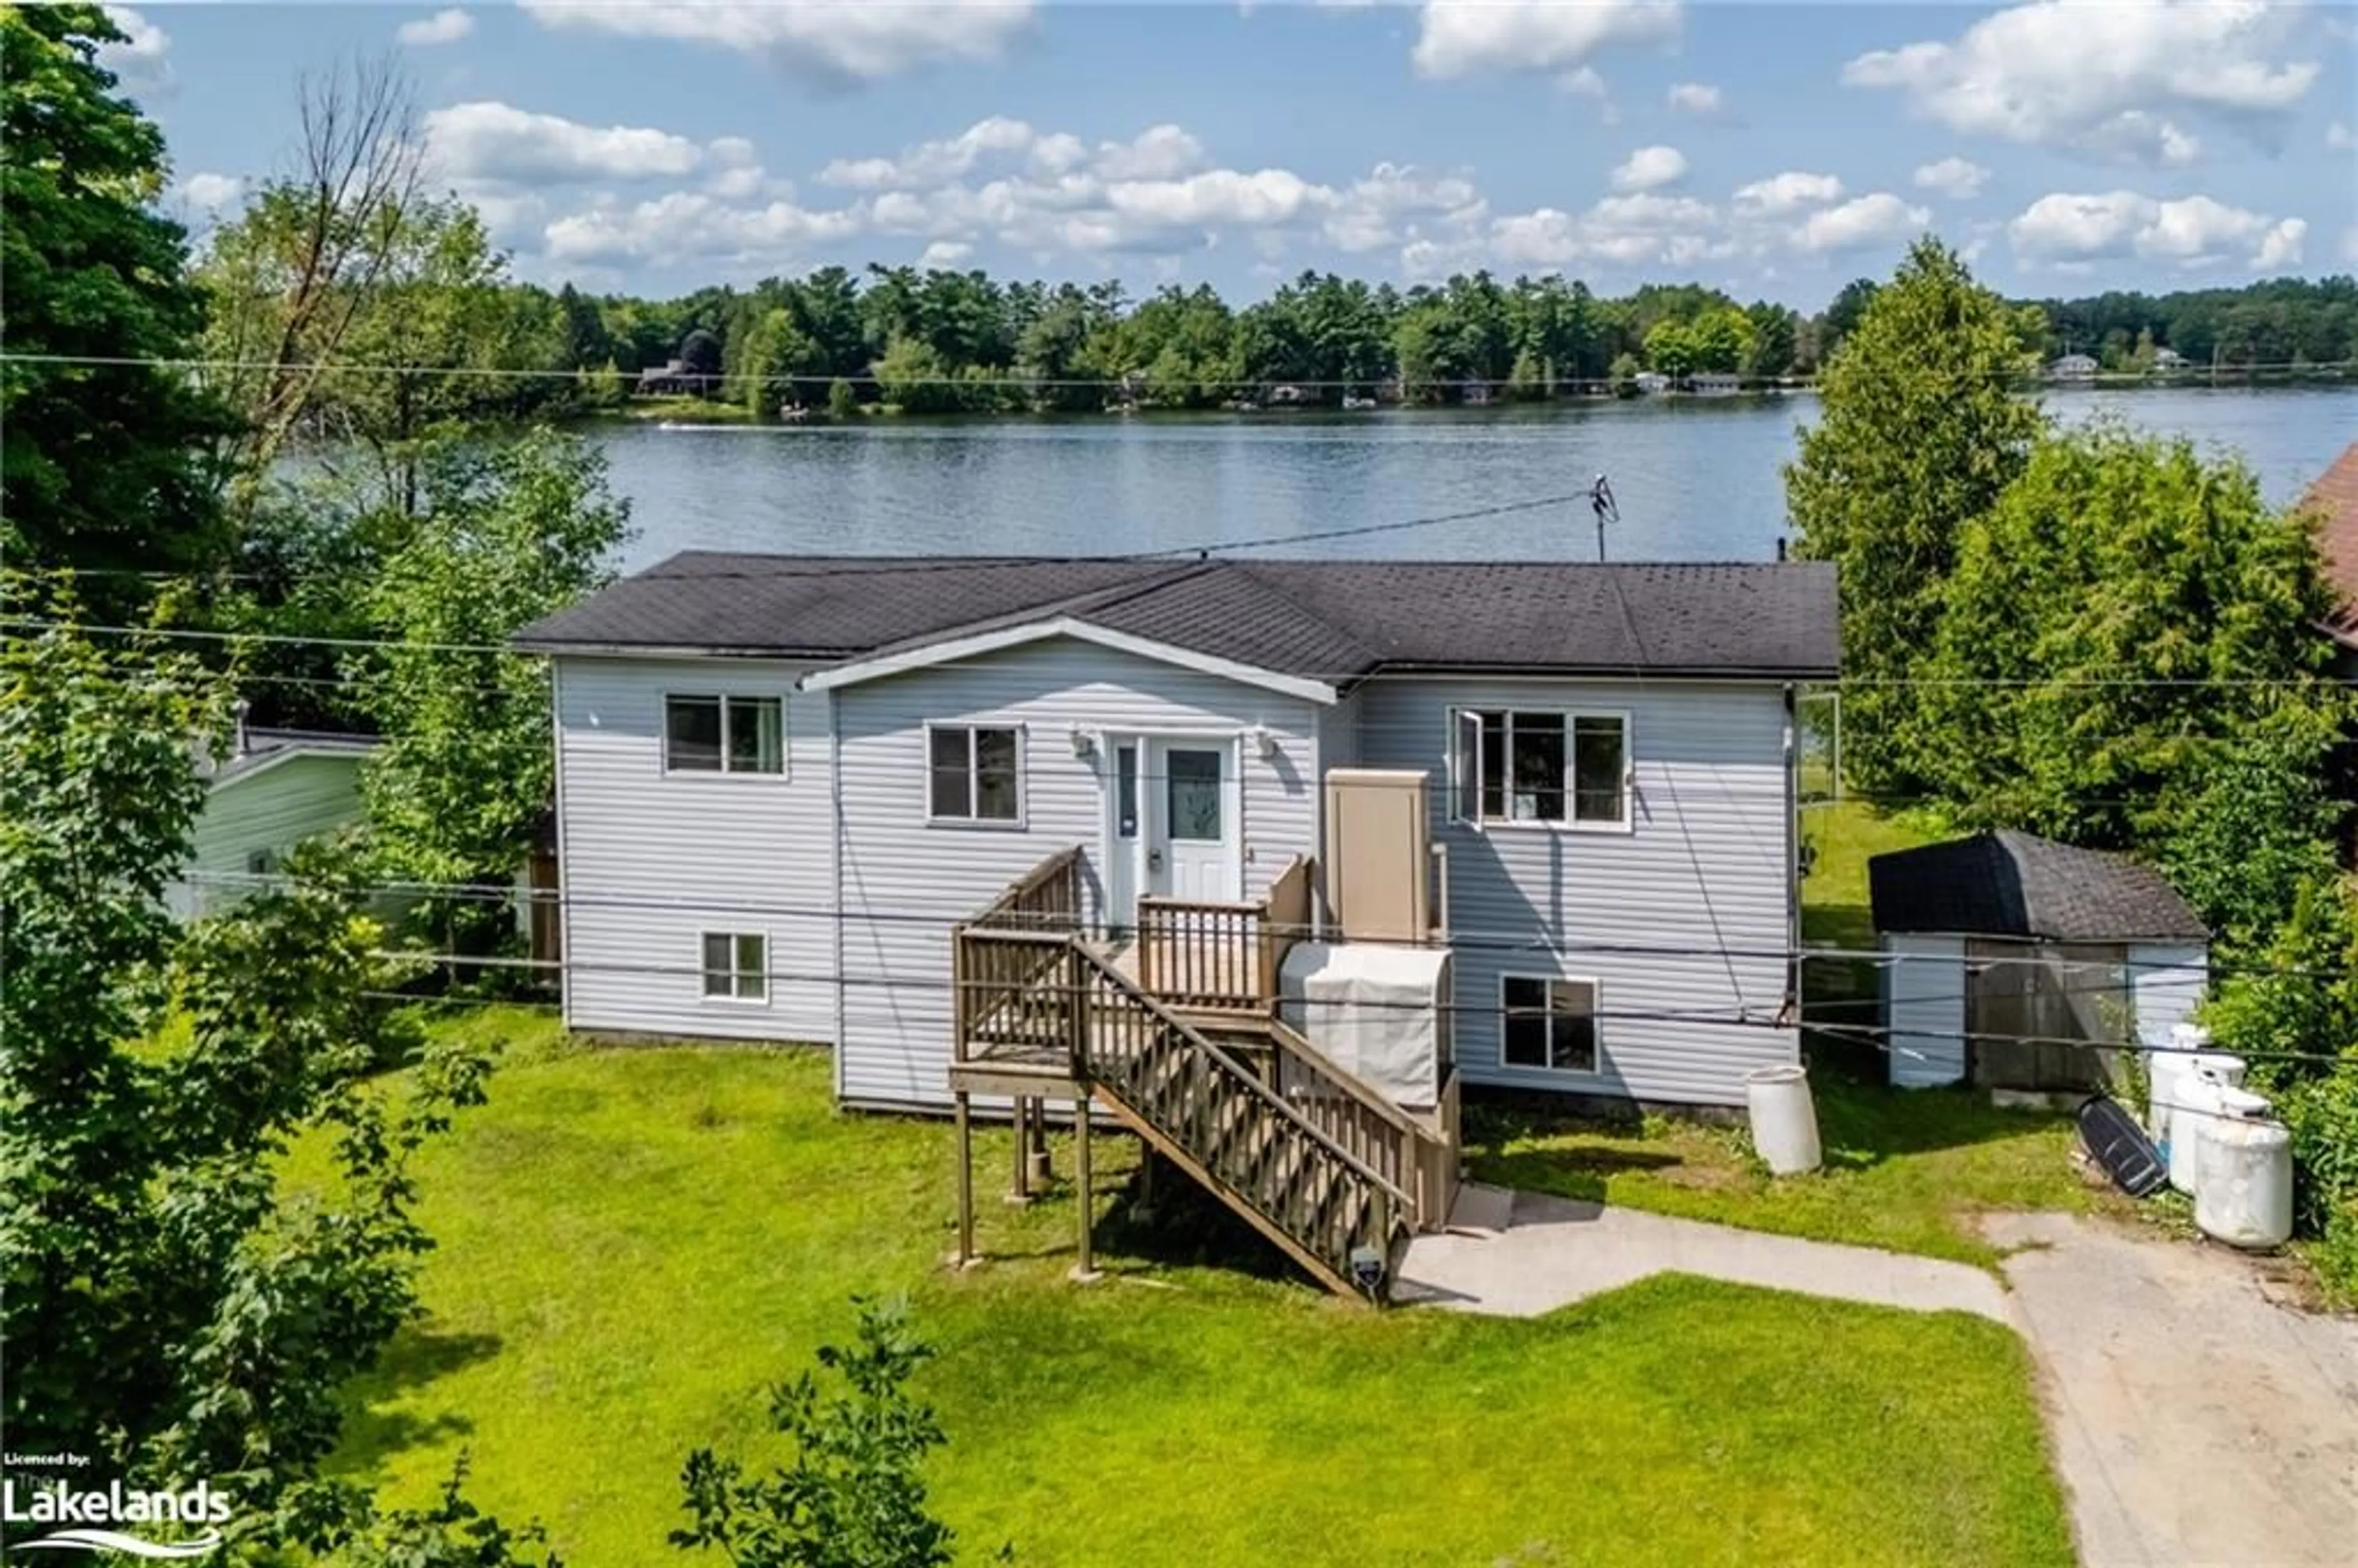 Cottage for 3338 Cox Dr, Severn Ontario L0K 2B0